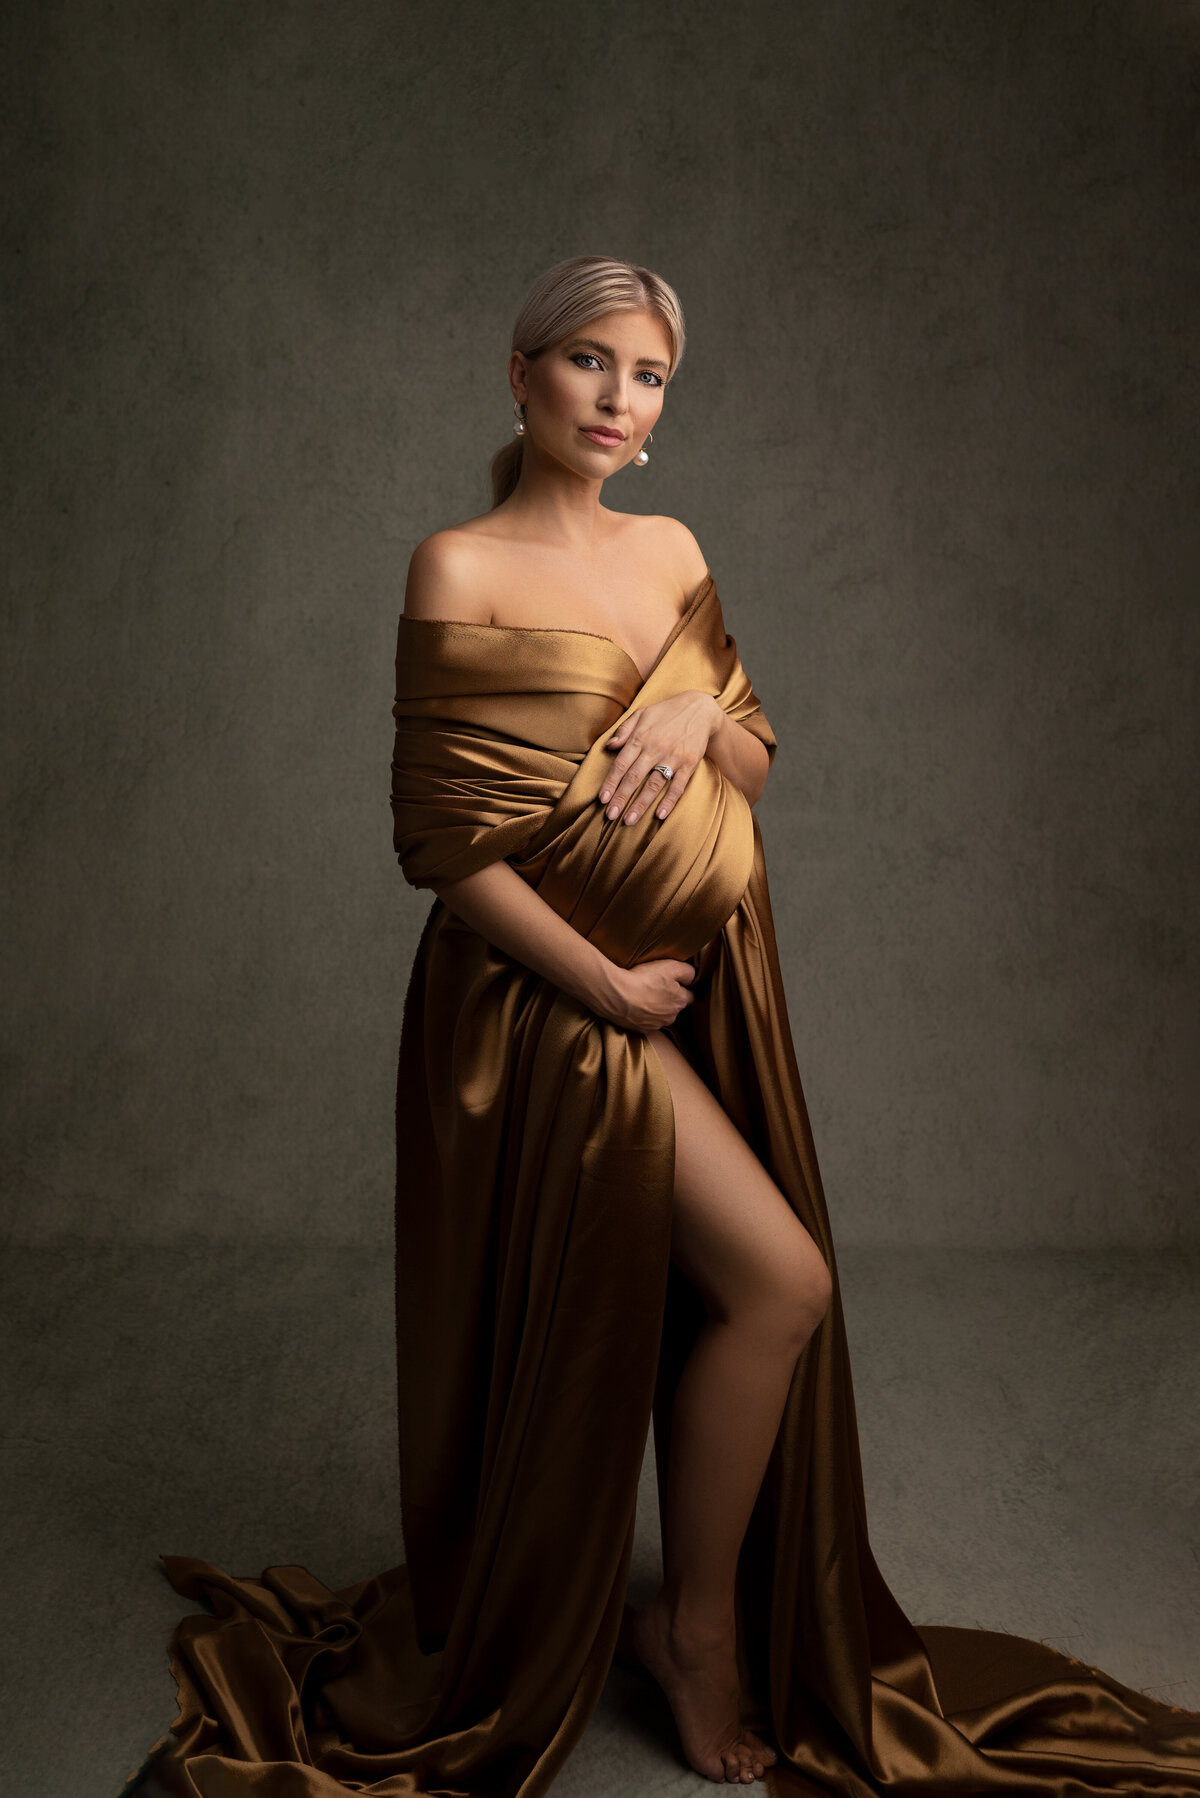 Woman poses for fine art maternity photos with New Jersey's best maternity photographer Katie Marshall. Woman is in a ruched, gold silk wrap  that puddles on the floor. She is angled slightly away from the camera with her front knee bent in the slit of the fabric. One hand is under her bump, the other over her bump. She is looking at the camera with a closed-mouth smile.